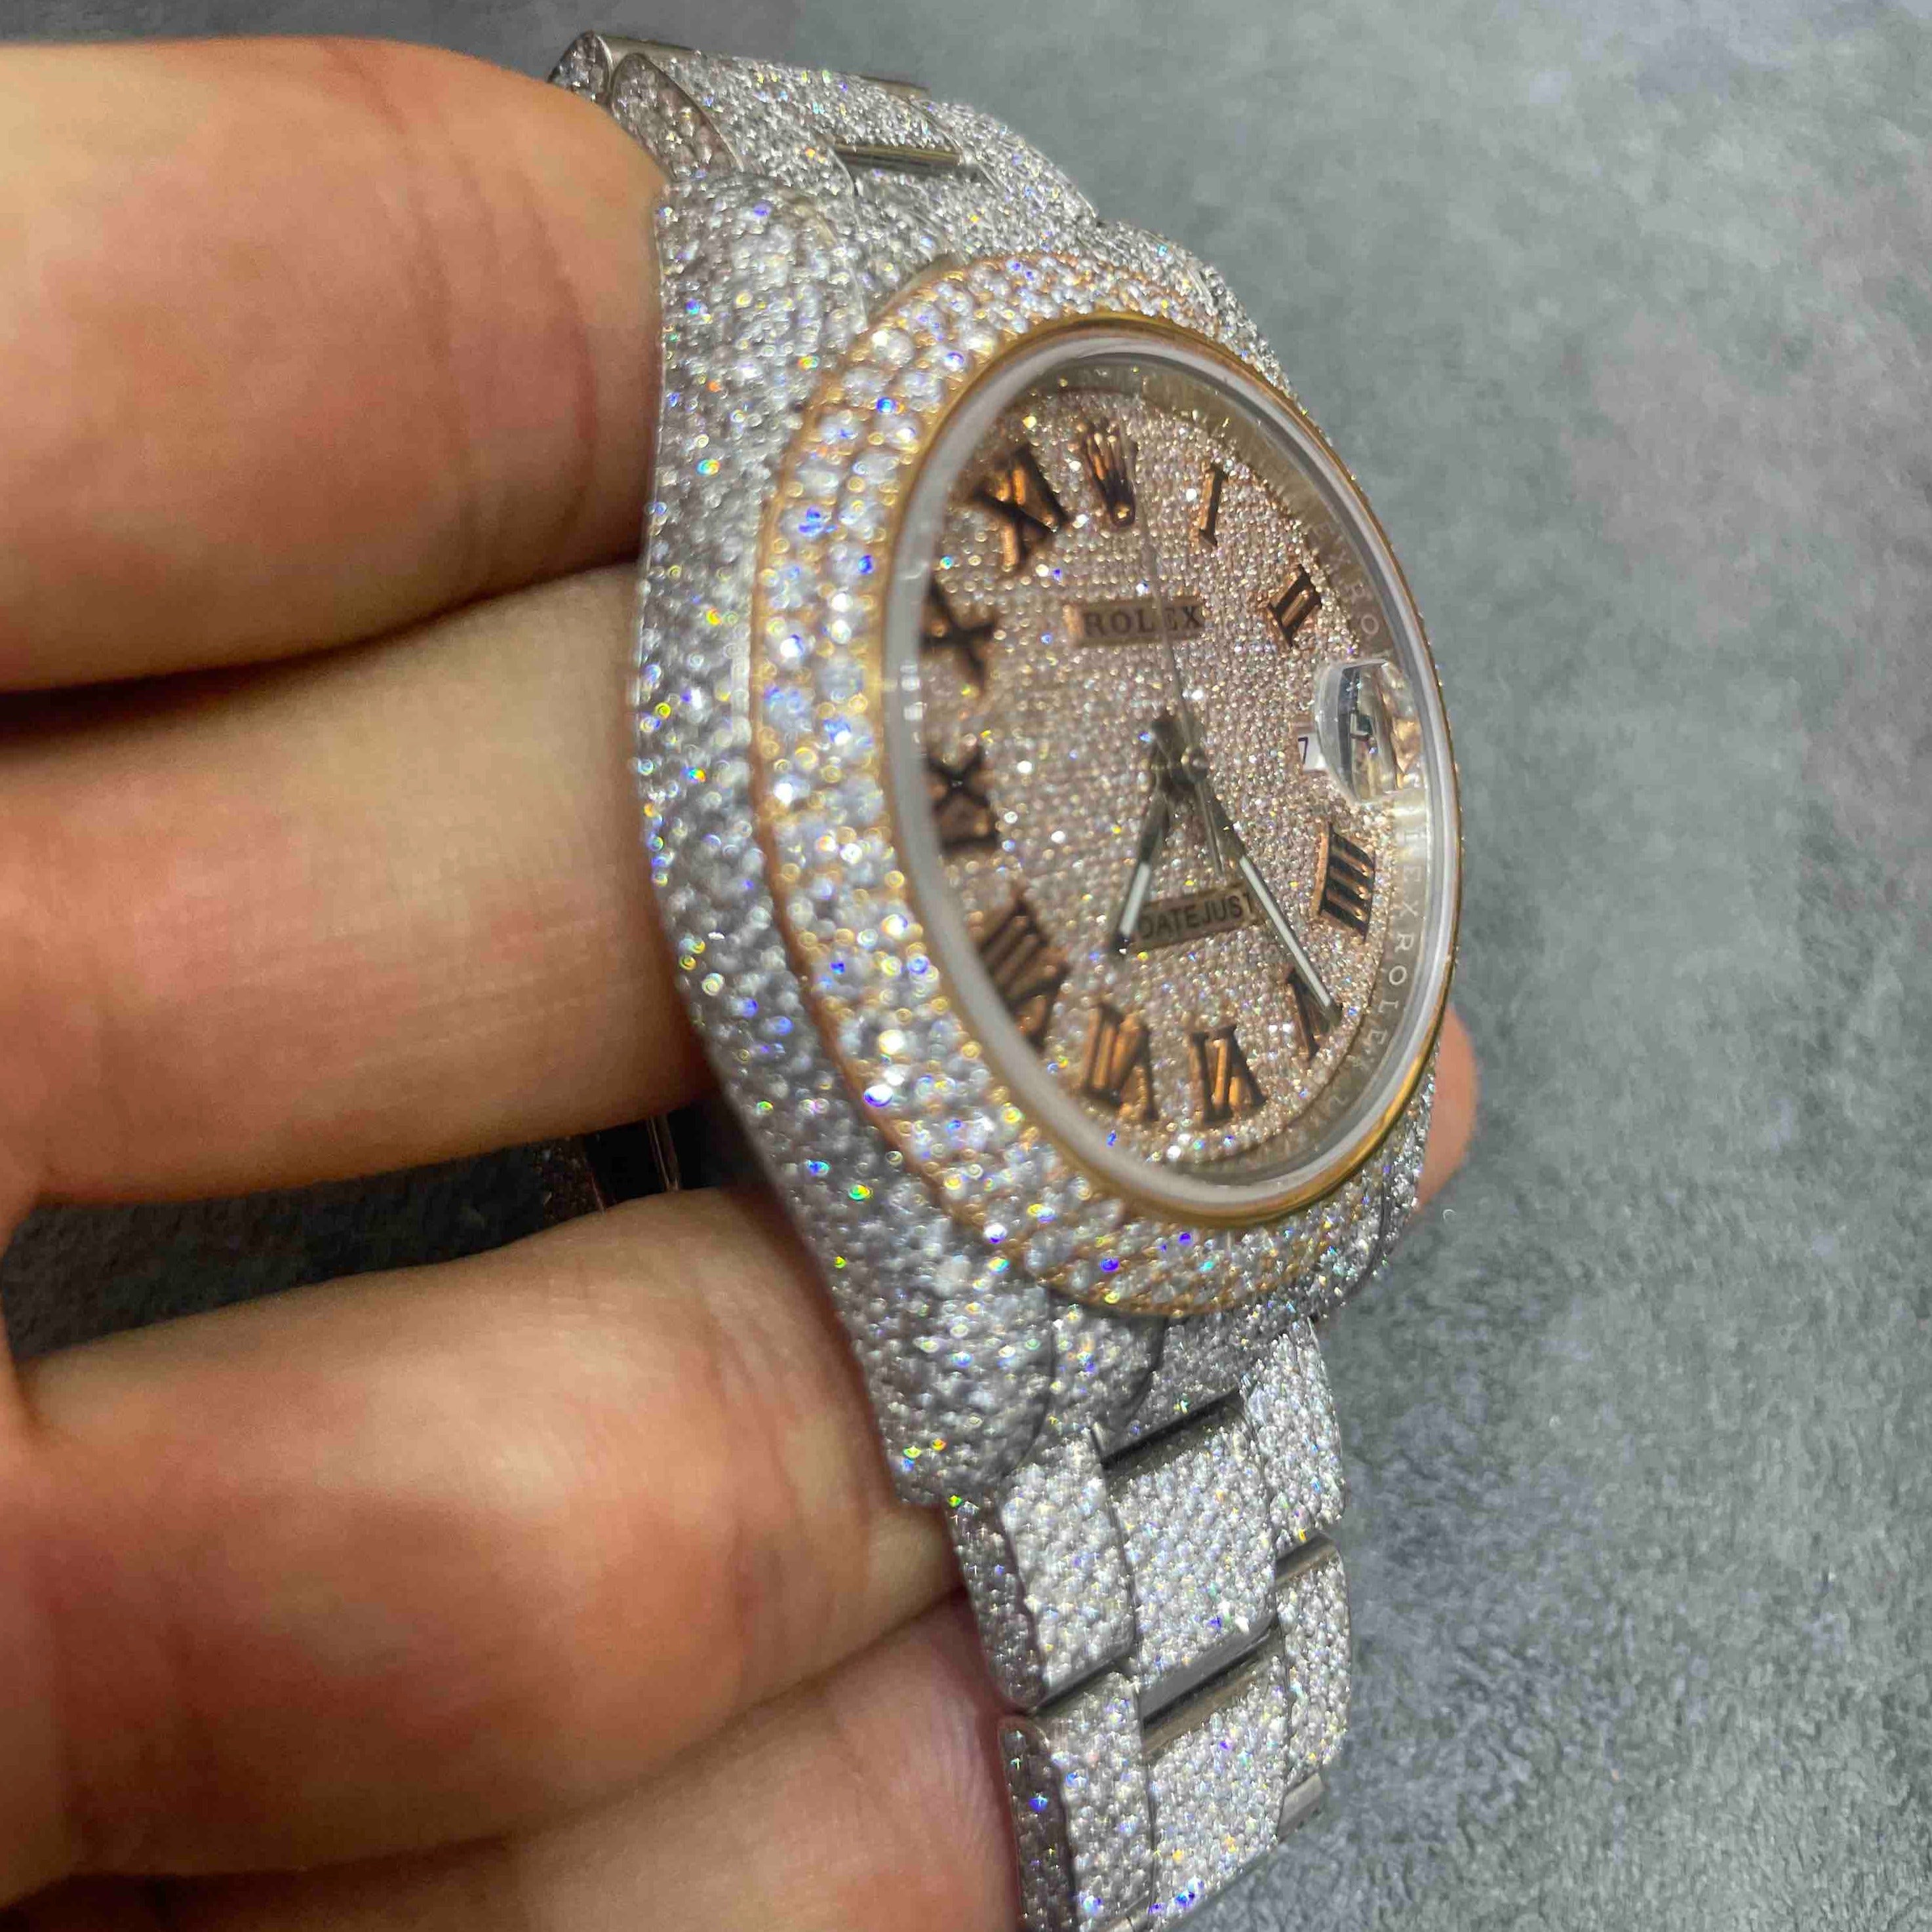 iced out rolex